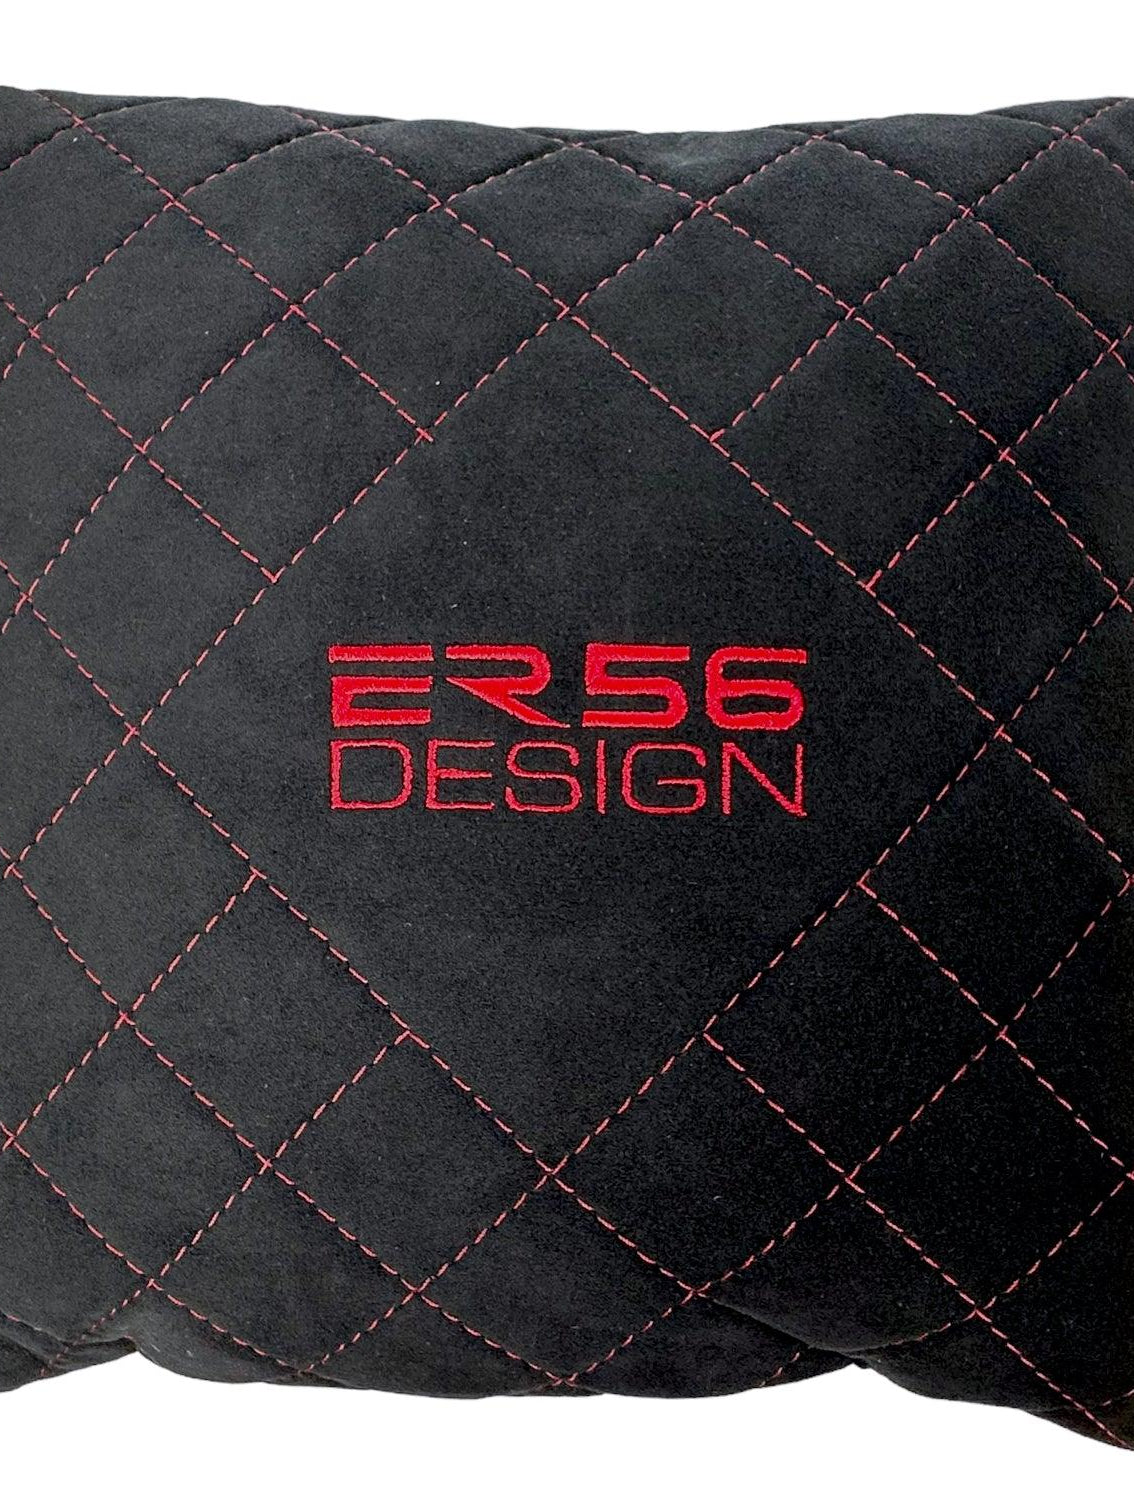 Black Alcantara Leather Pillows ER56 Design Set of 2 Red Sewing - AutoWin